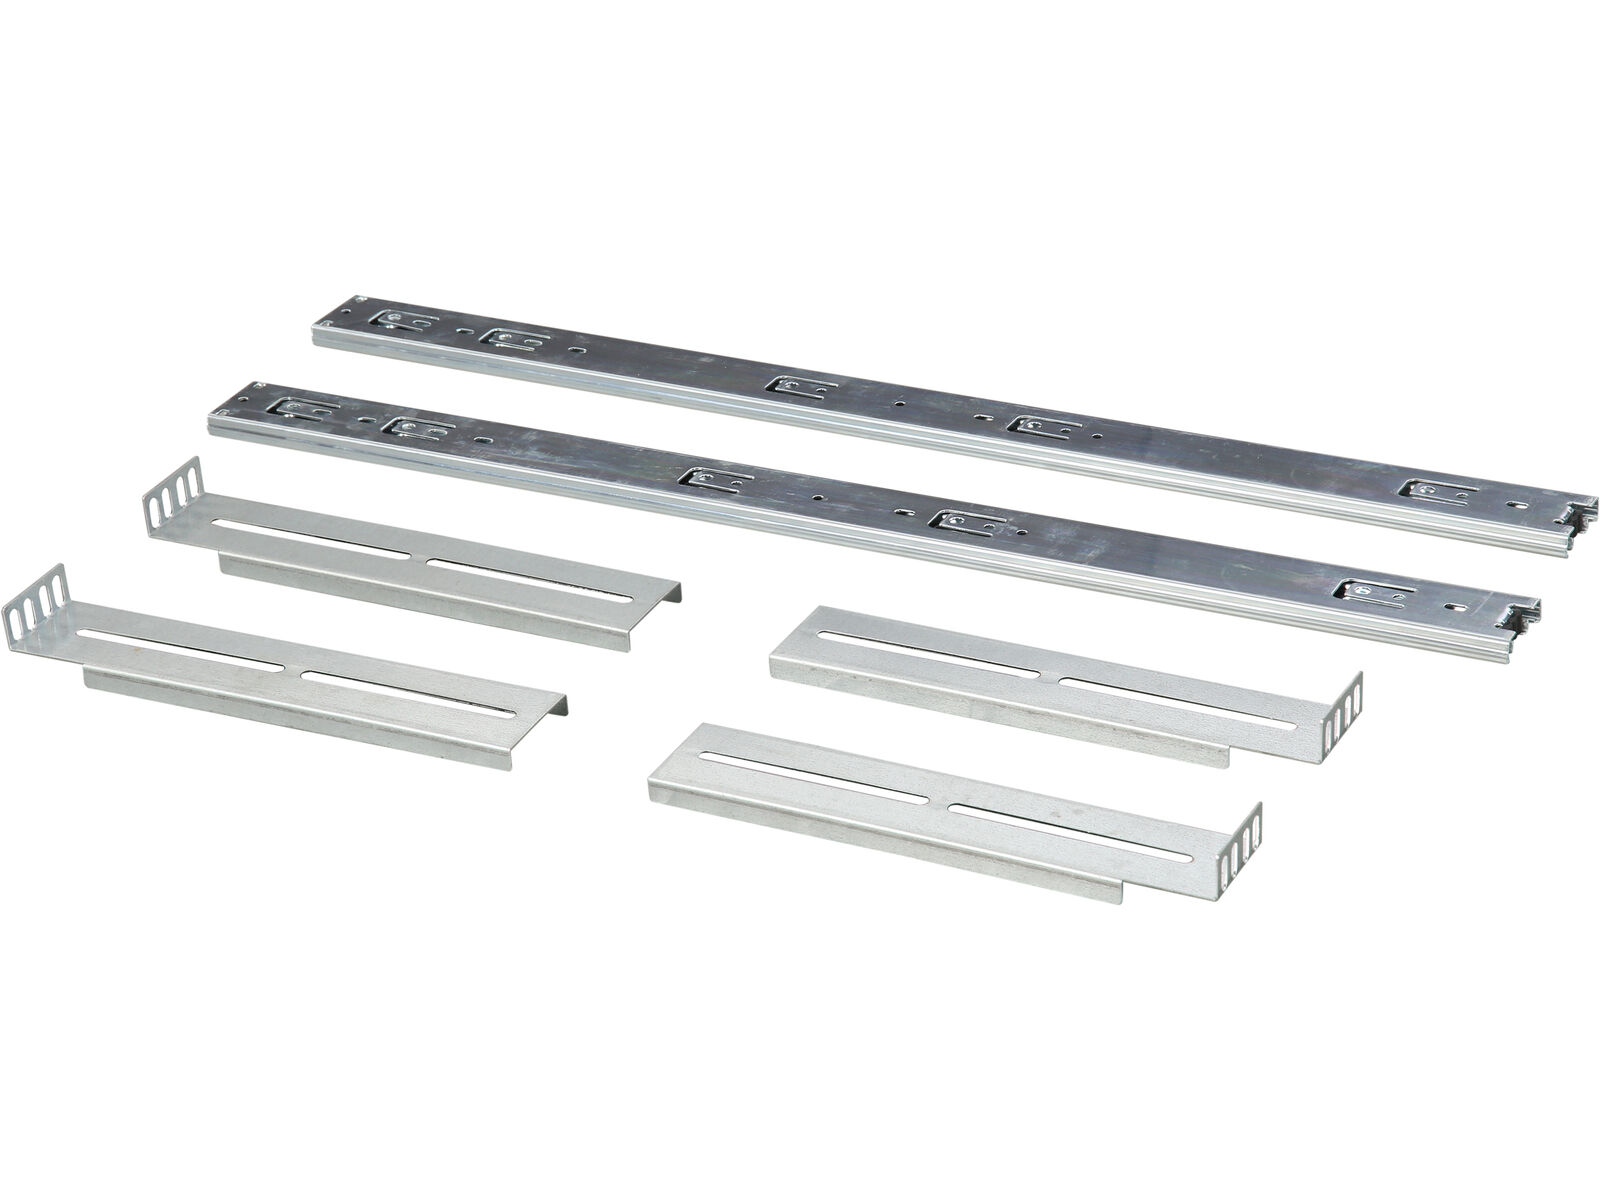 Rosewill 3-Section Ball-Bearing Sliding Rail Kit for Rackmount Chassis RSV-R28LX